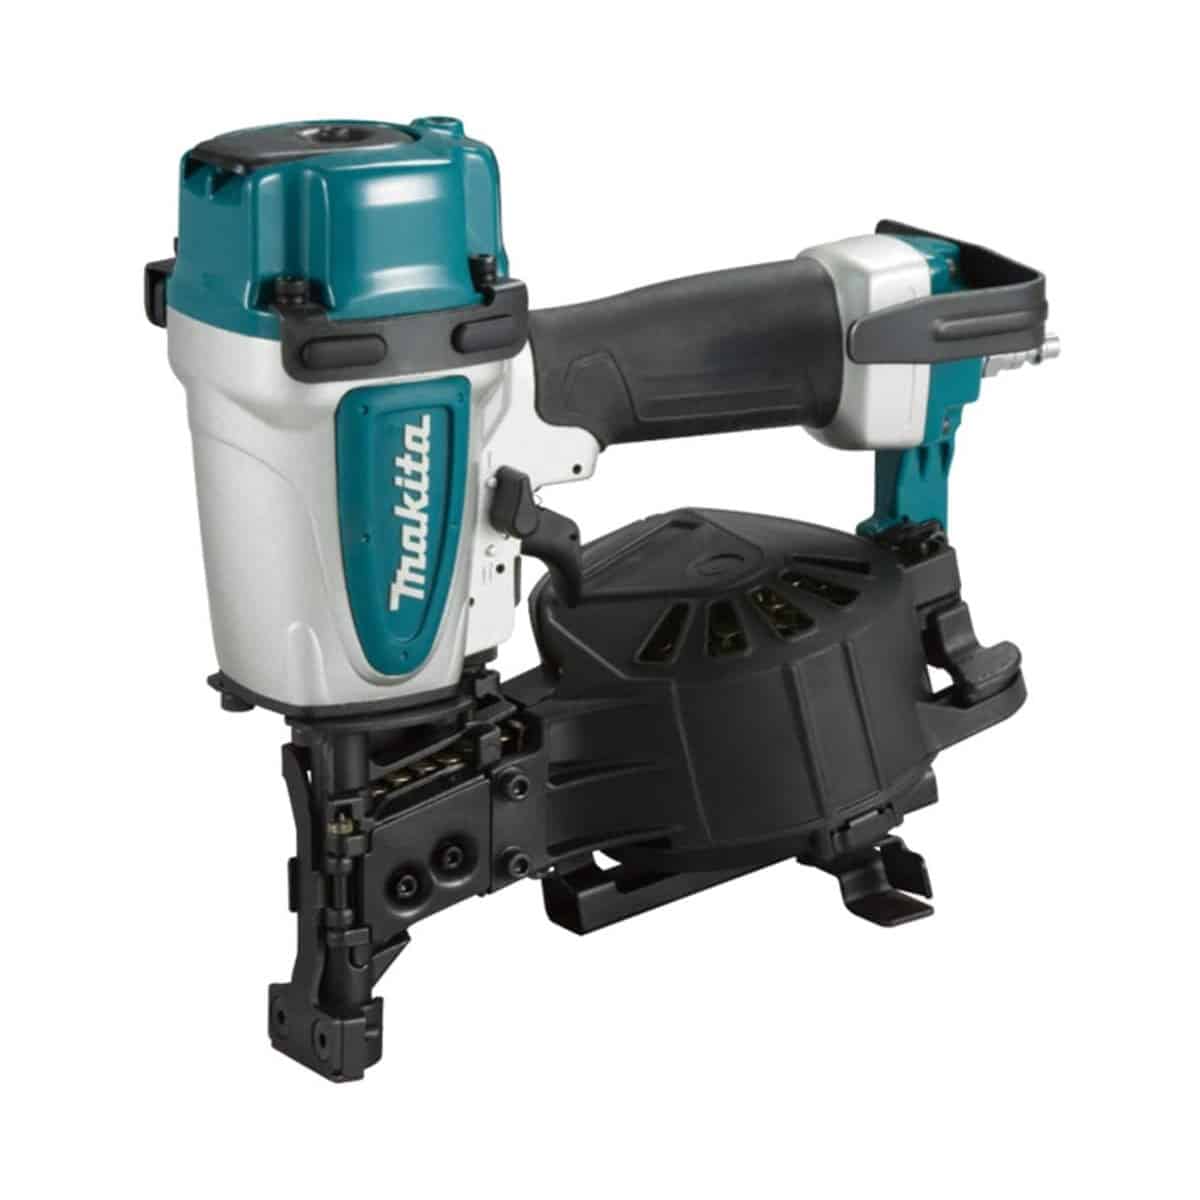 Makita AN454 1 3 4 inch Coil Roofing Nailer - Best Roofing Nailer - Top 10 Products on the Market - HandyMan.Guide - Roofing Nailer